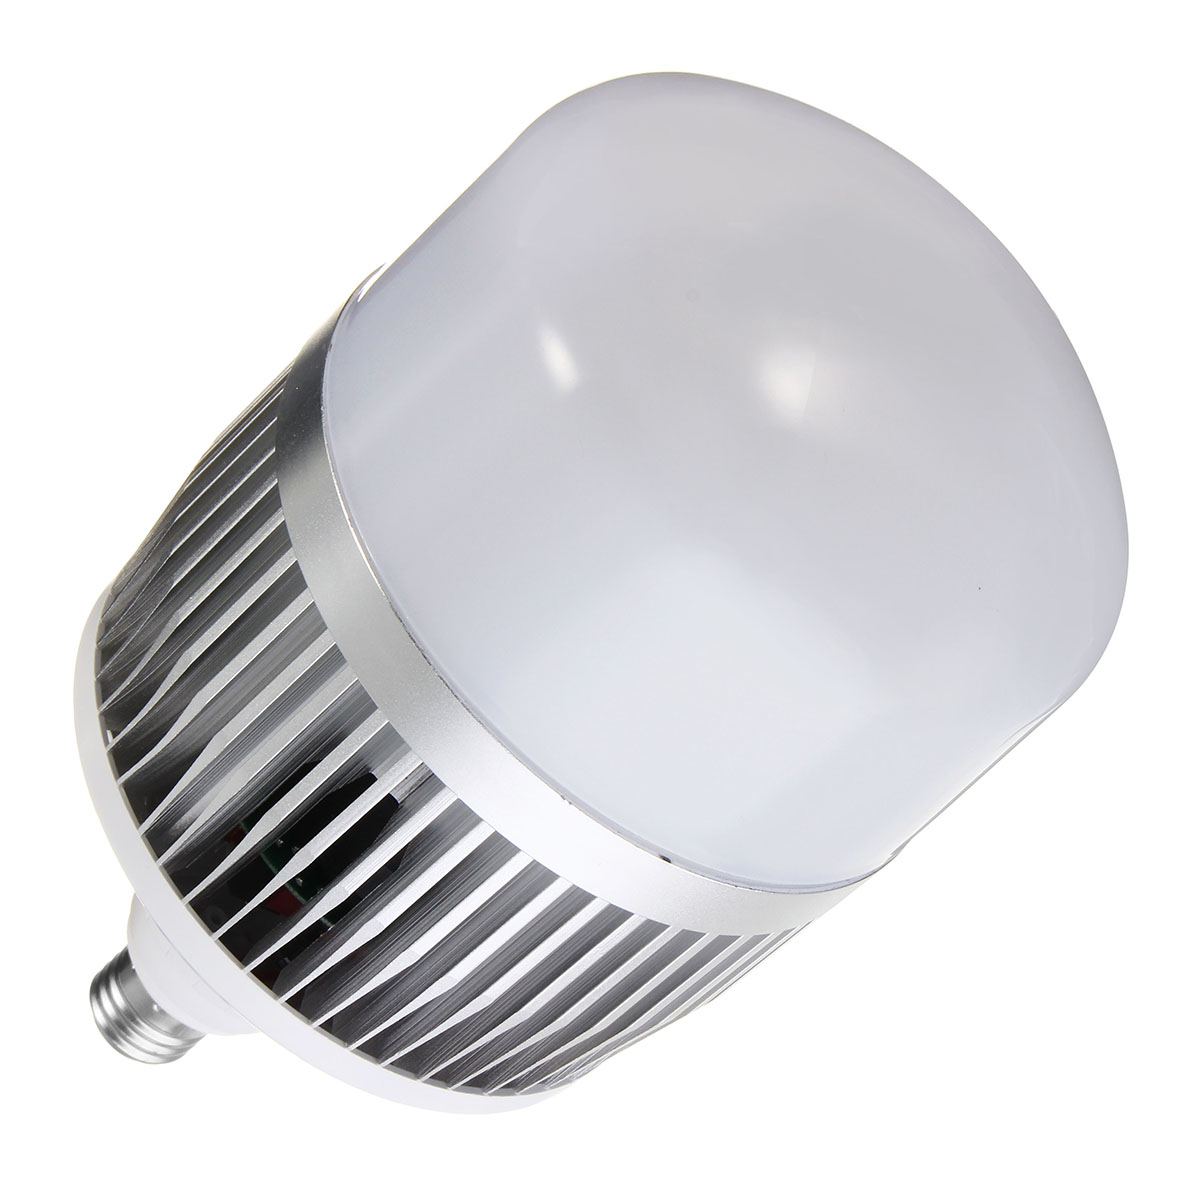 E27-200W-100LMW-SMD3030-Warm-White-Pure-White-LED-Light-Bulb-for-Factory-Industry-AC85-265V-1241309